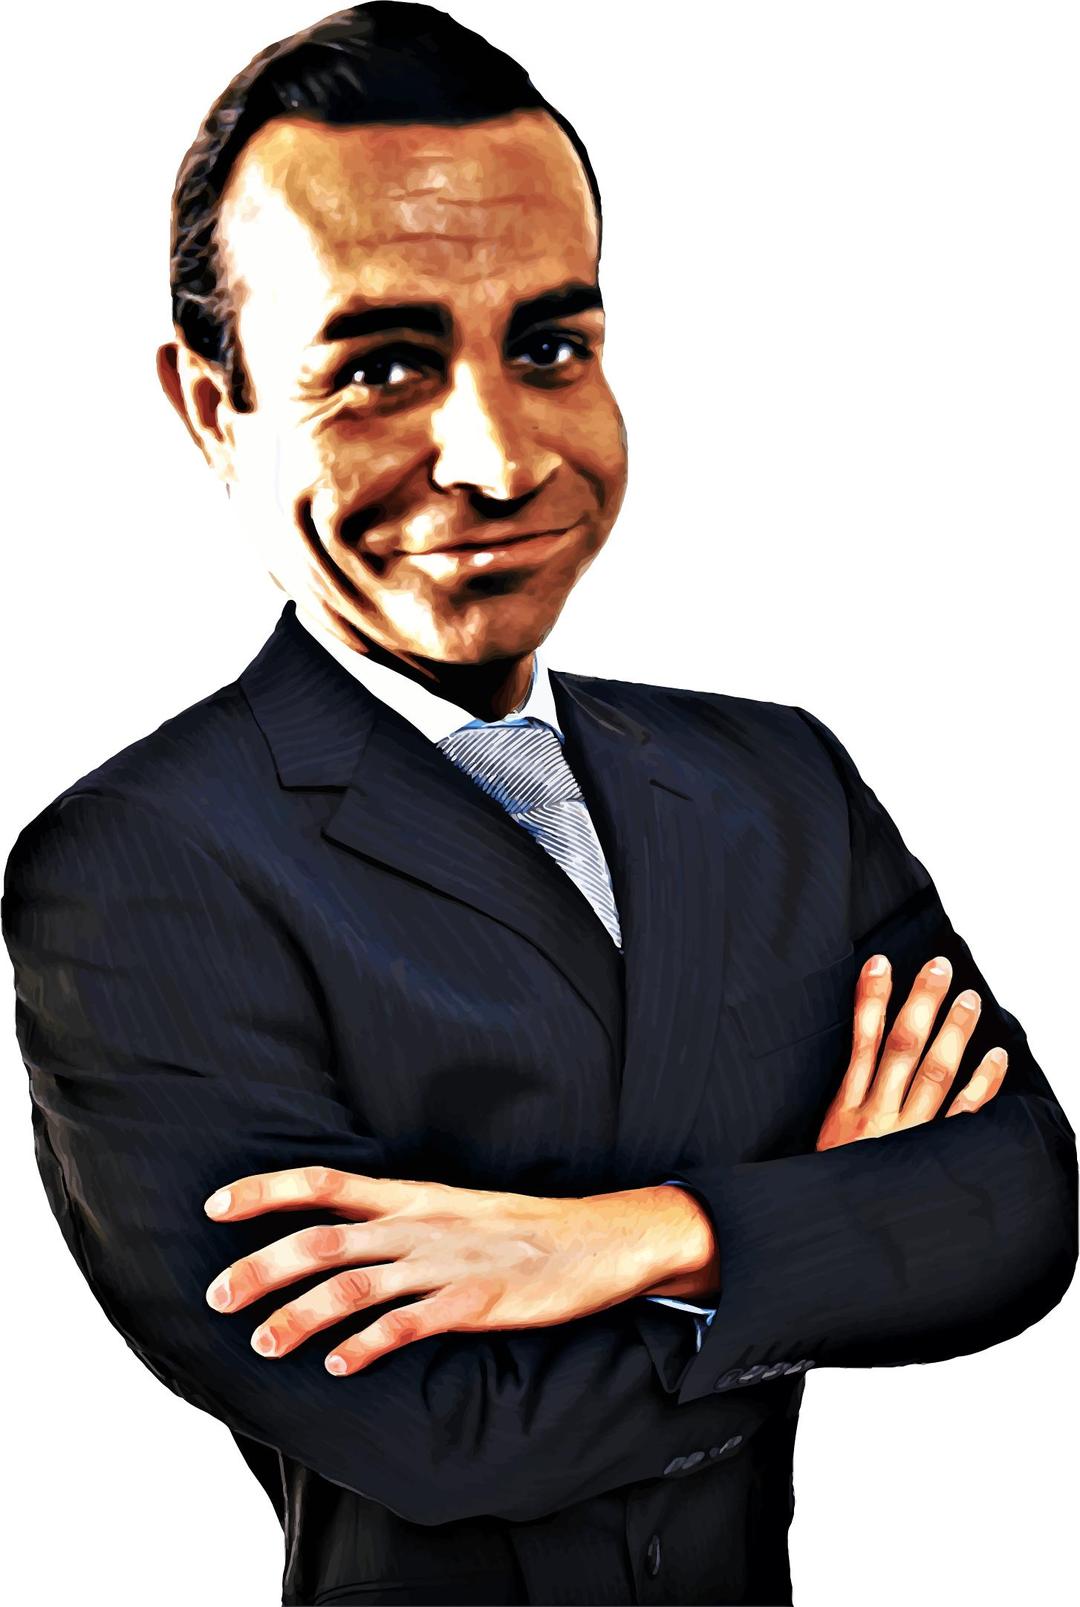 Sean Connery Caricature png transparent